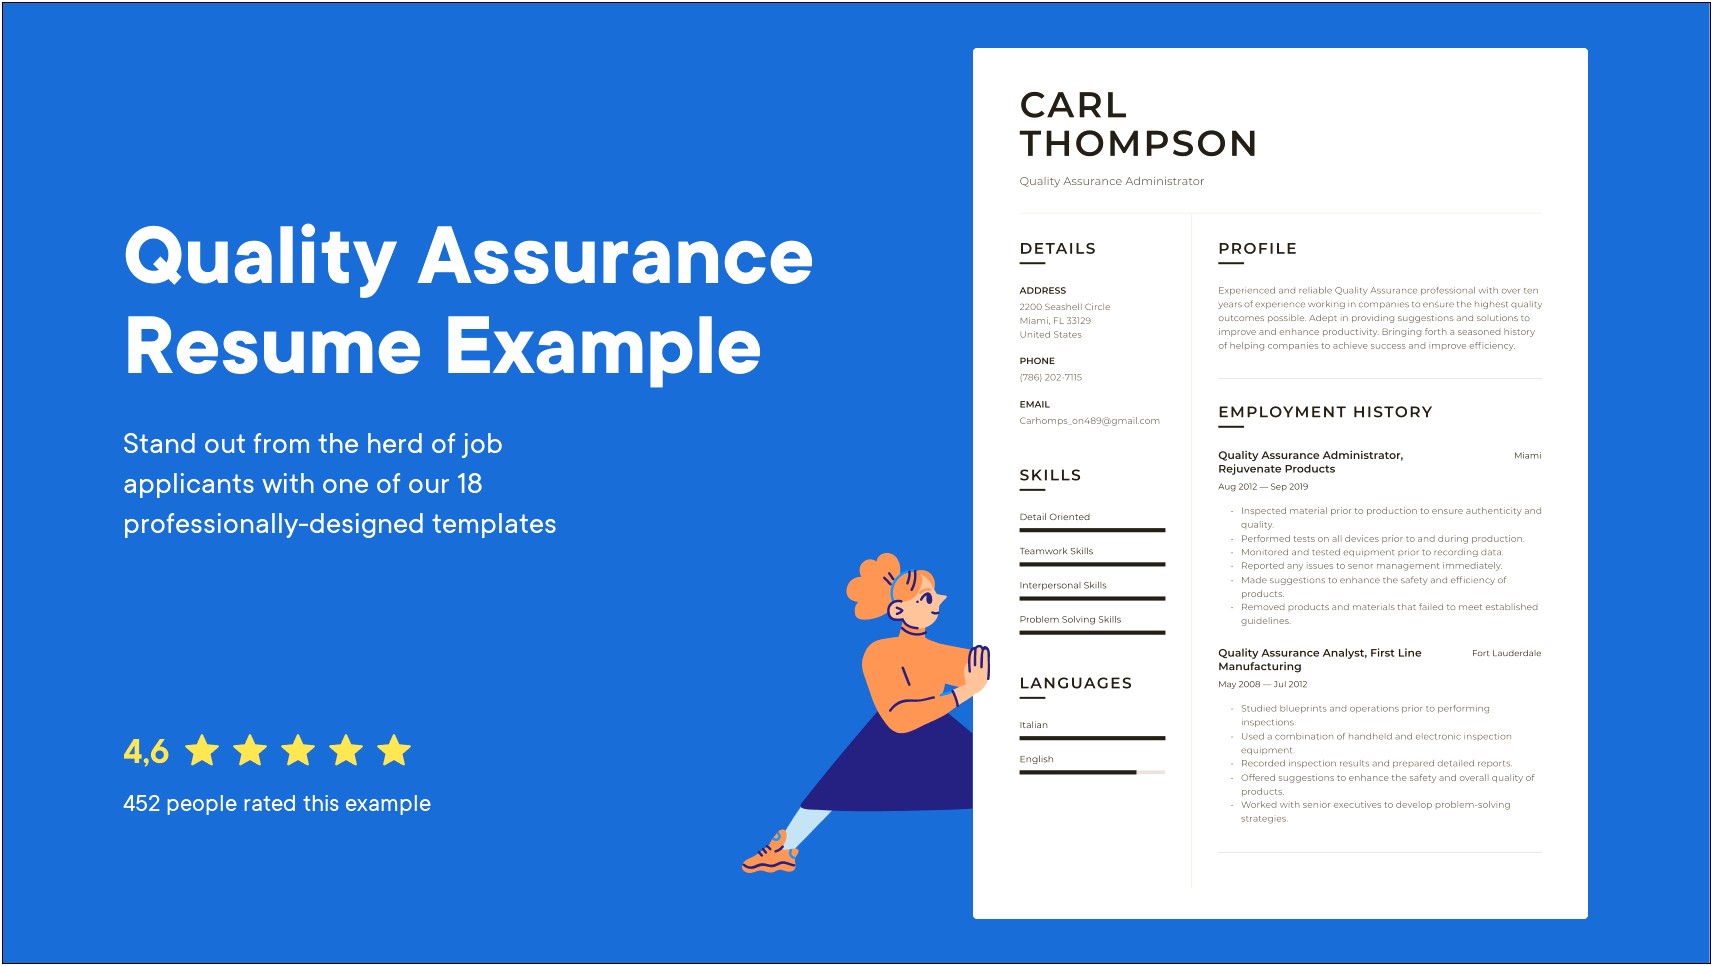 Resume Skills For Food Quality Assurance Assistant